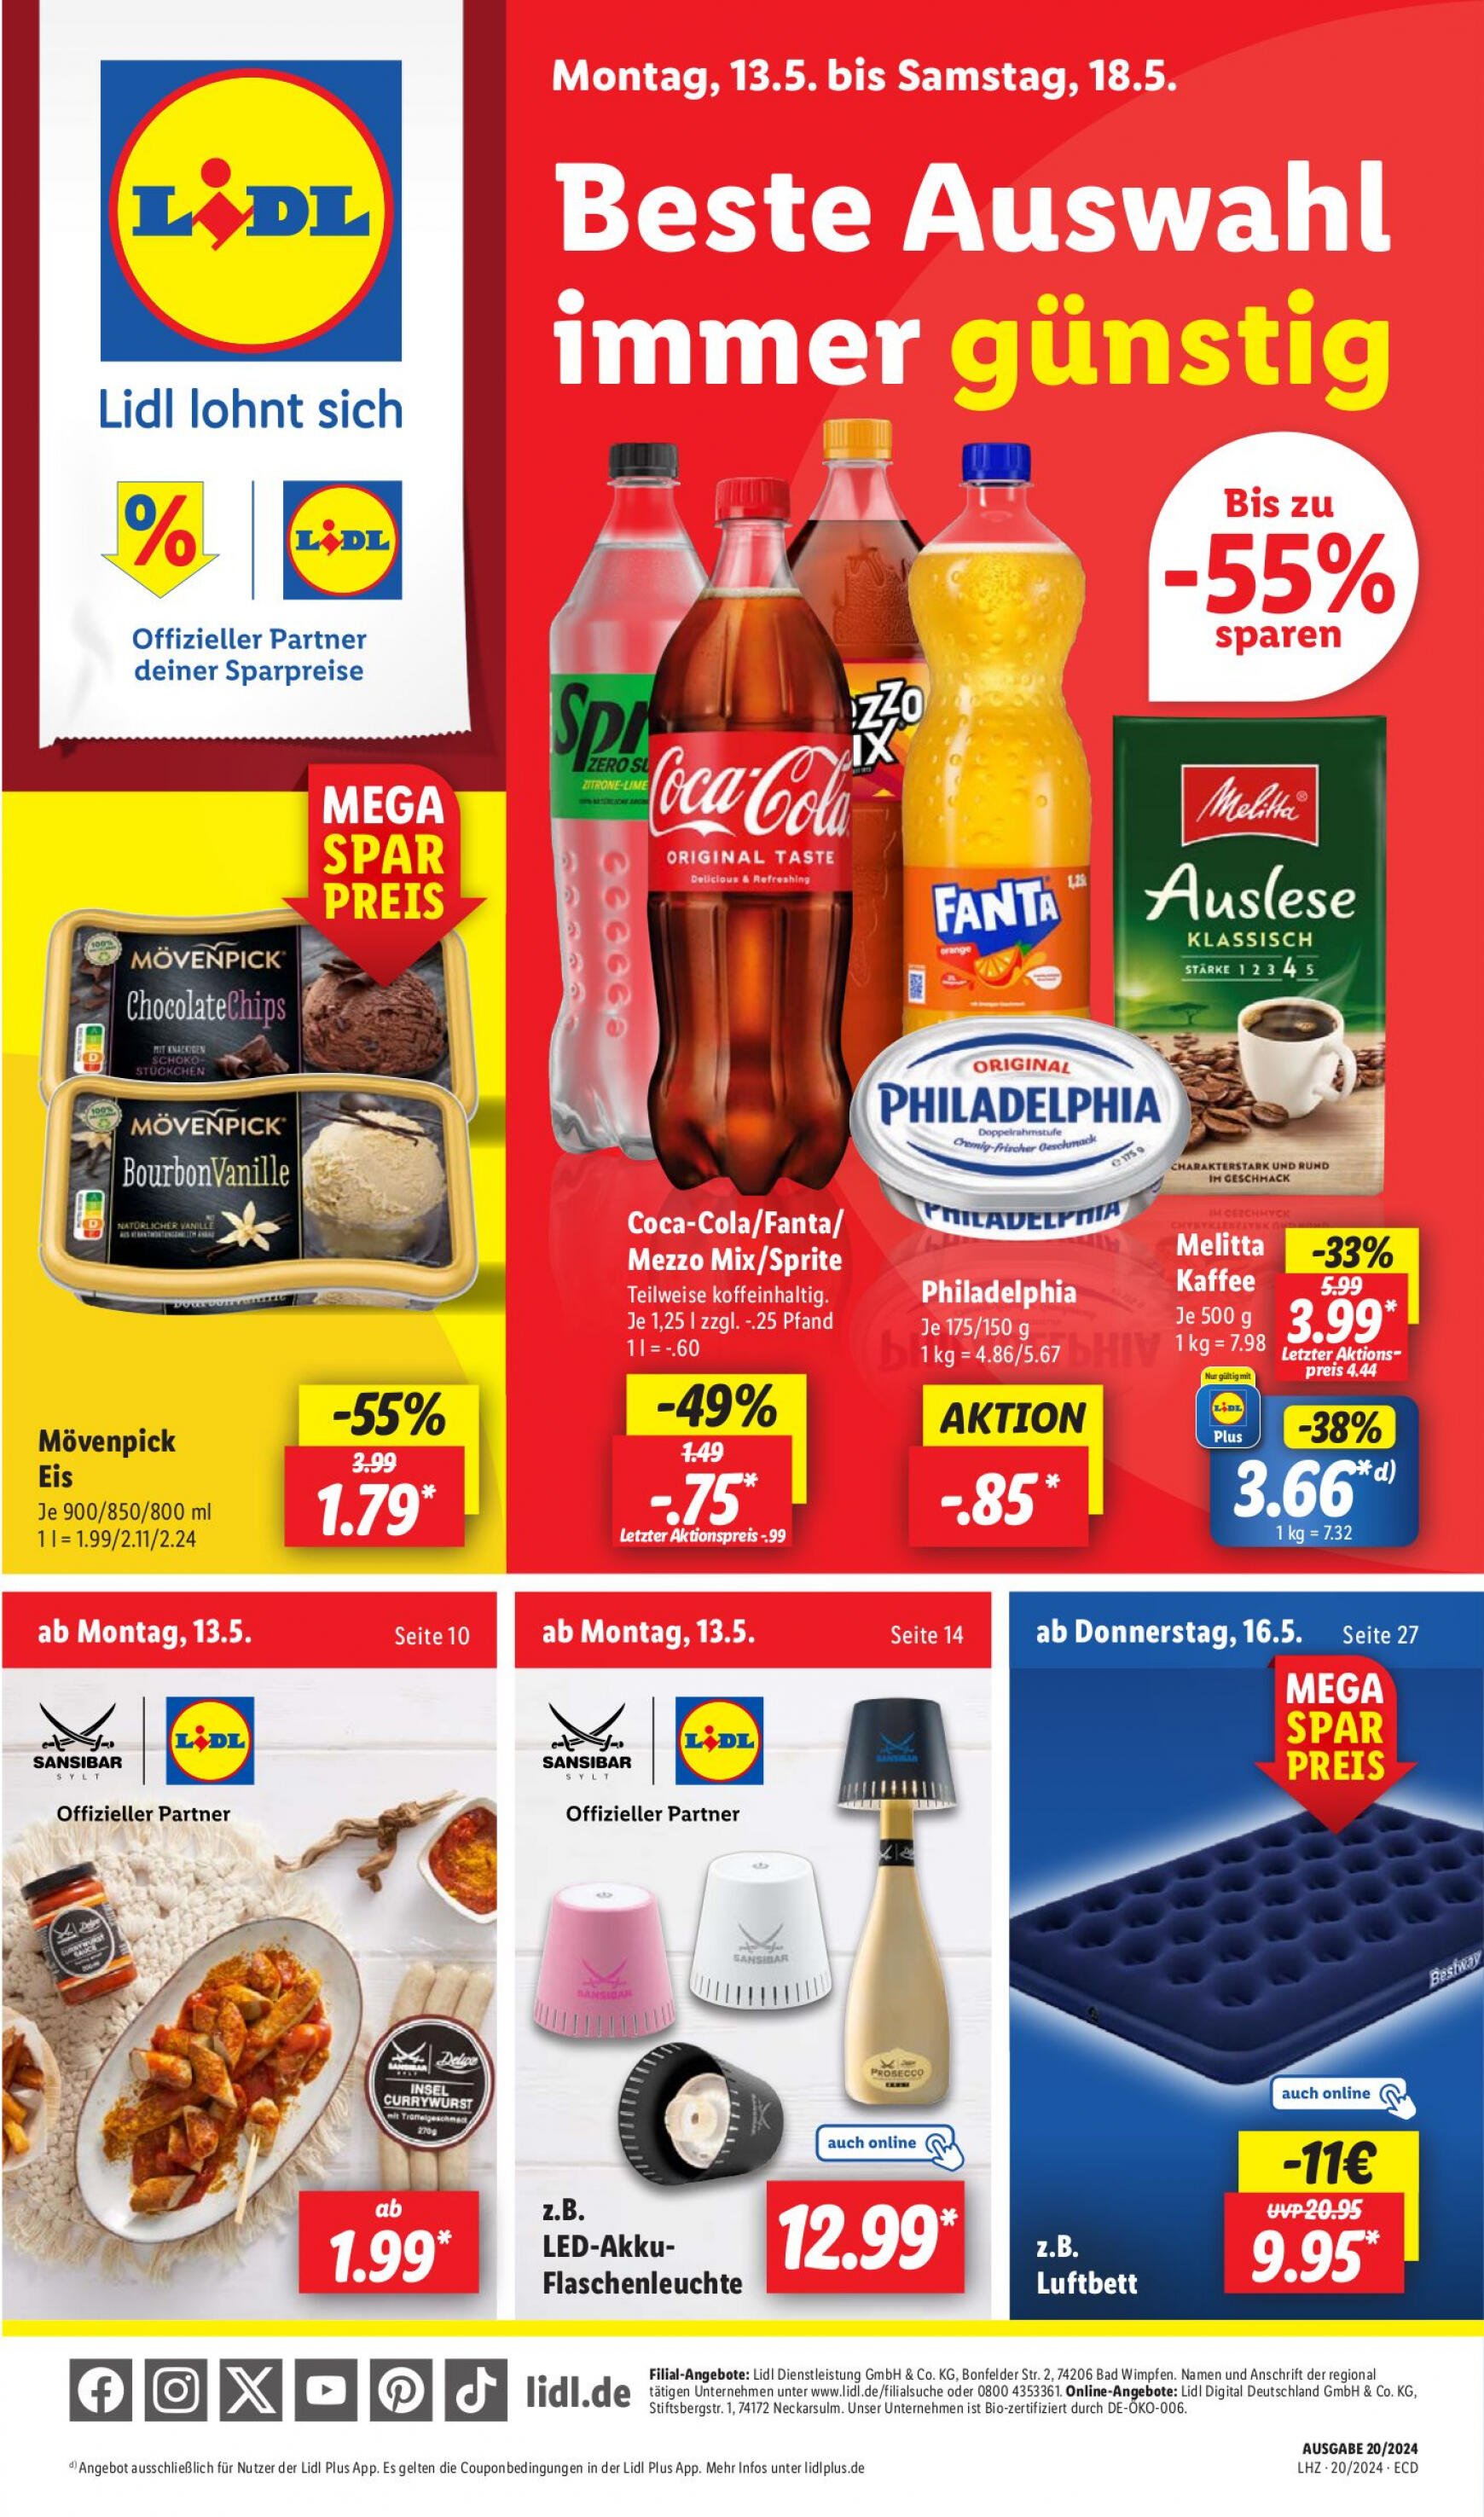 lidl - Flyer Lidl aktuell 13.05. - 18.05. - page: 1